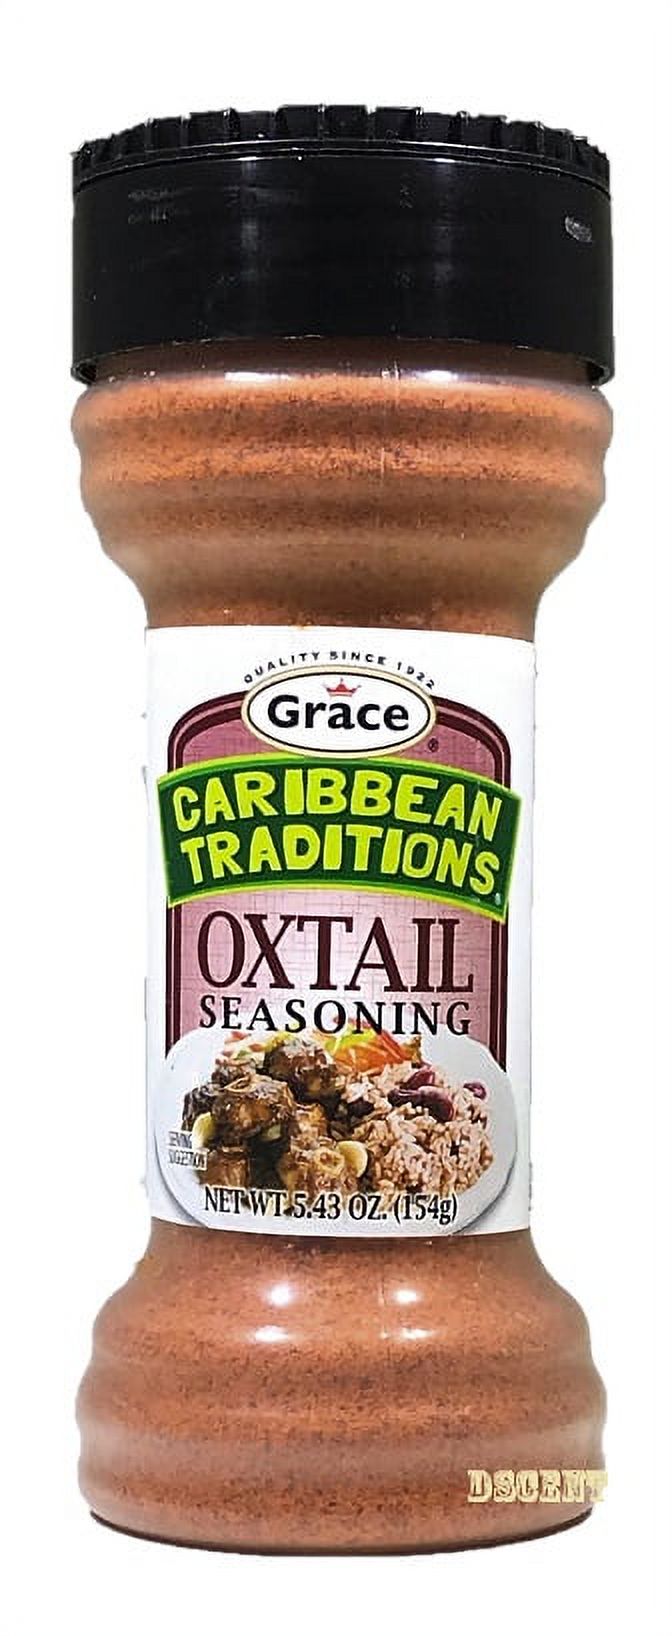 Grace Caribbean Traditions Oxtail Seasoning (2 Pack) 5.43 oz Shakers - image 2 of 4